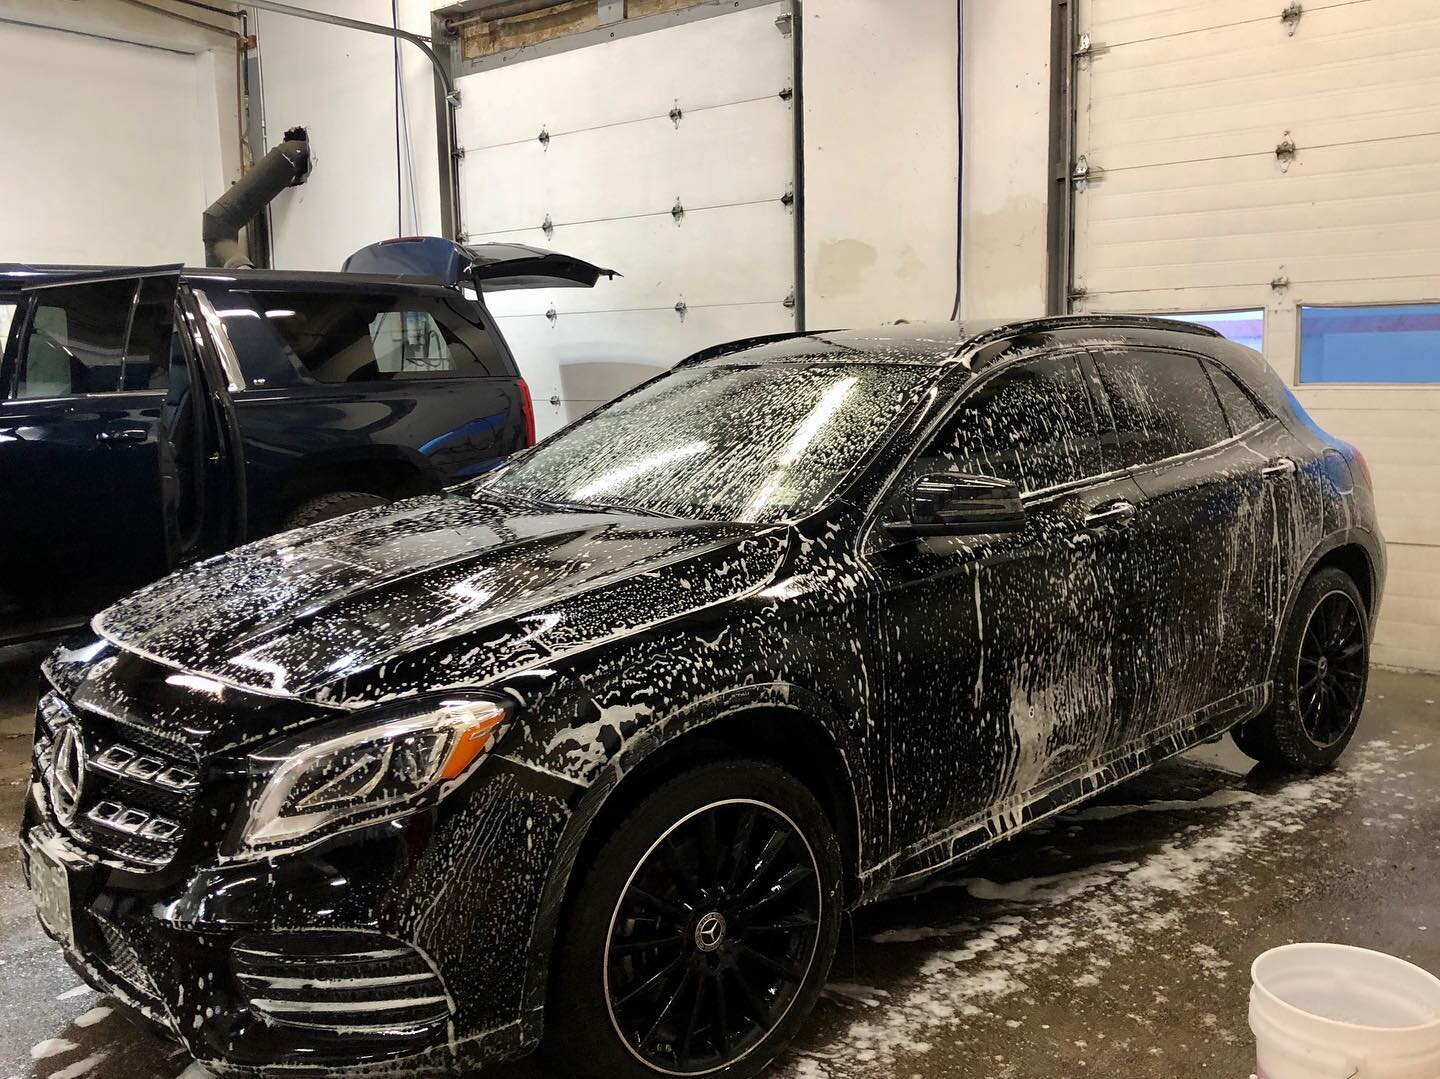 Getting soapy right before the weekend... nice and squeaky clean!!! 🧽🧽🧽 #Detailed #Boulder #DetailsPlusAuto #ClearChoice #HardWork #Clean #Cars #Automotive #Colorado #Retail #ReturnCustomersAreTheBest